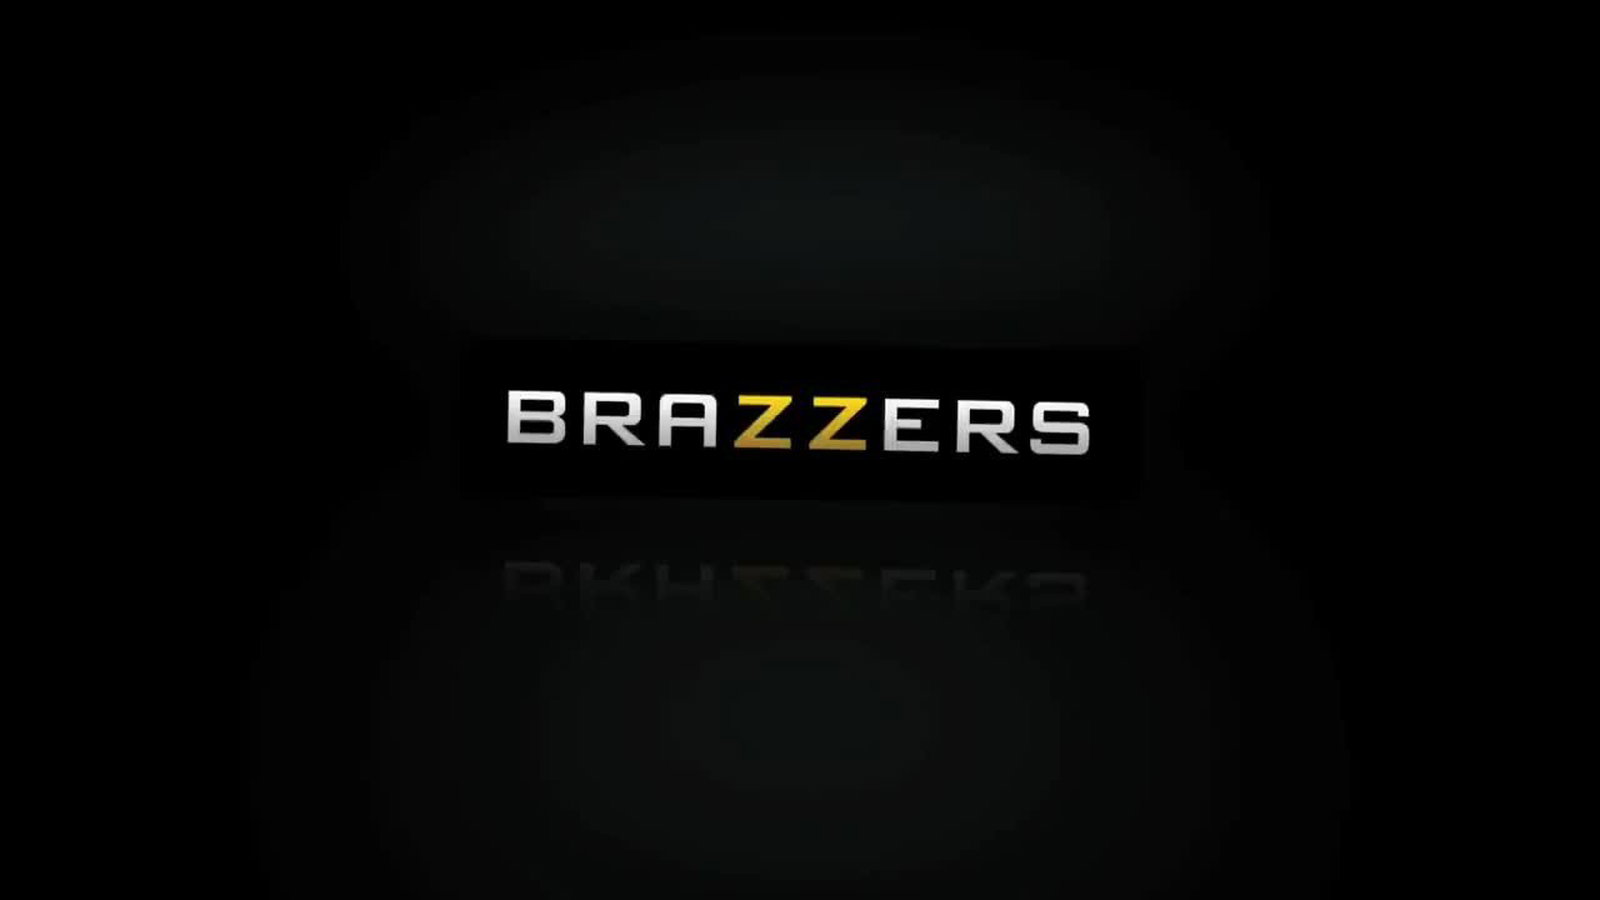 Video post by Brazzers